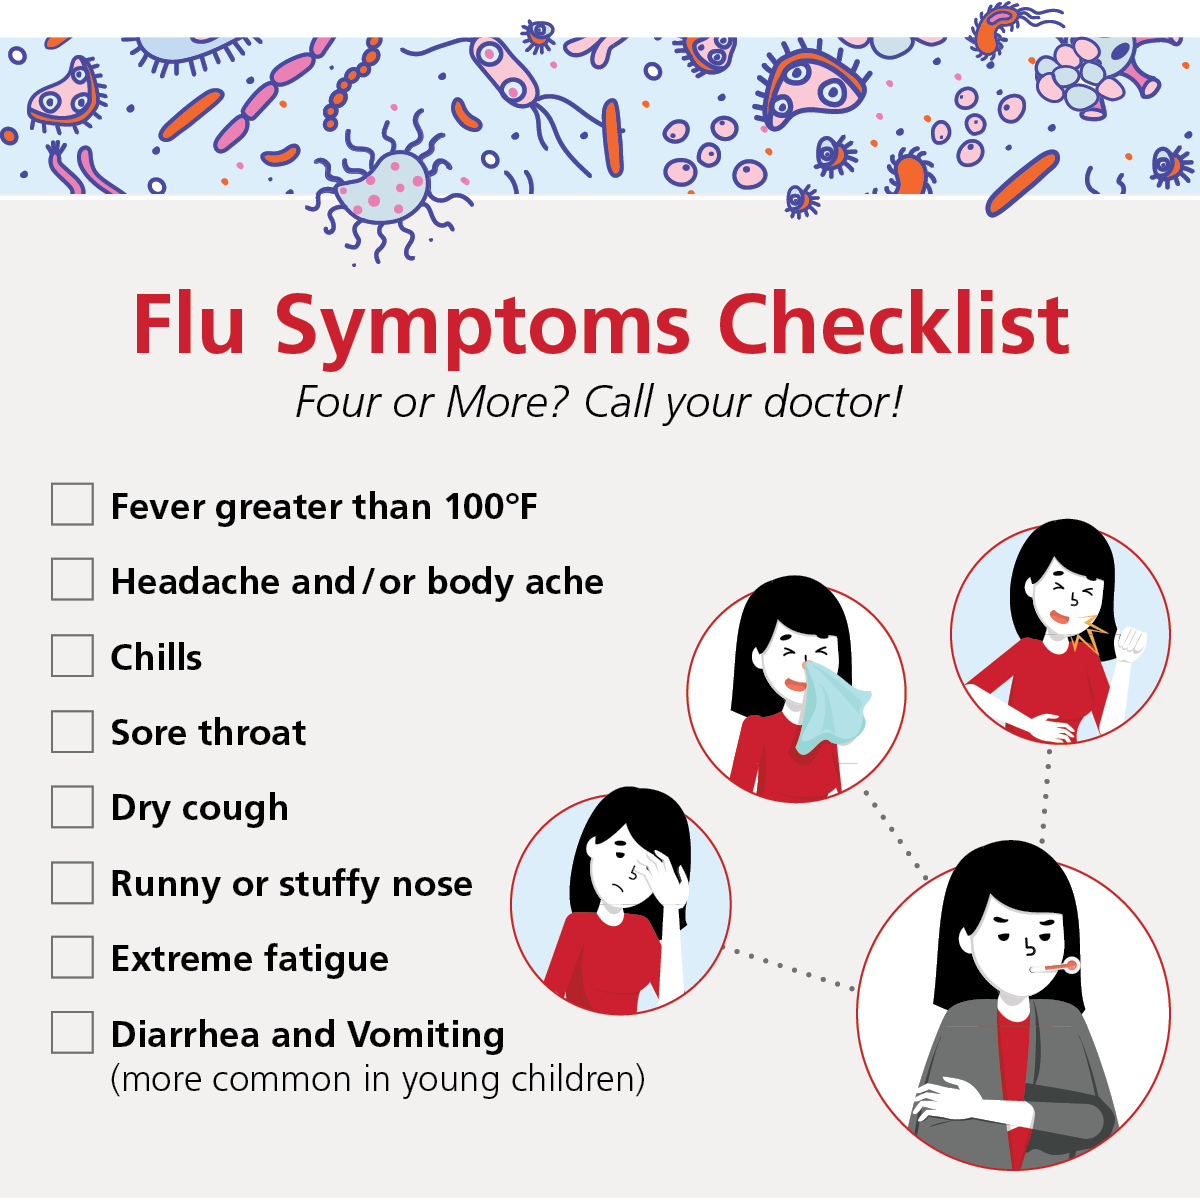 What are the symptoms of the flu? A checklist detailing symptoms